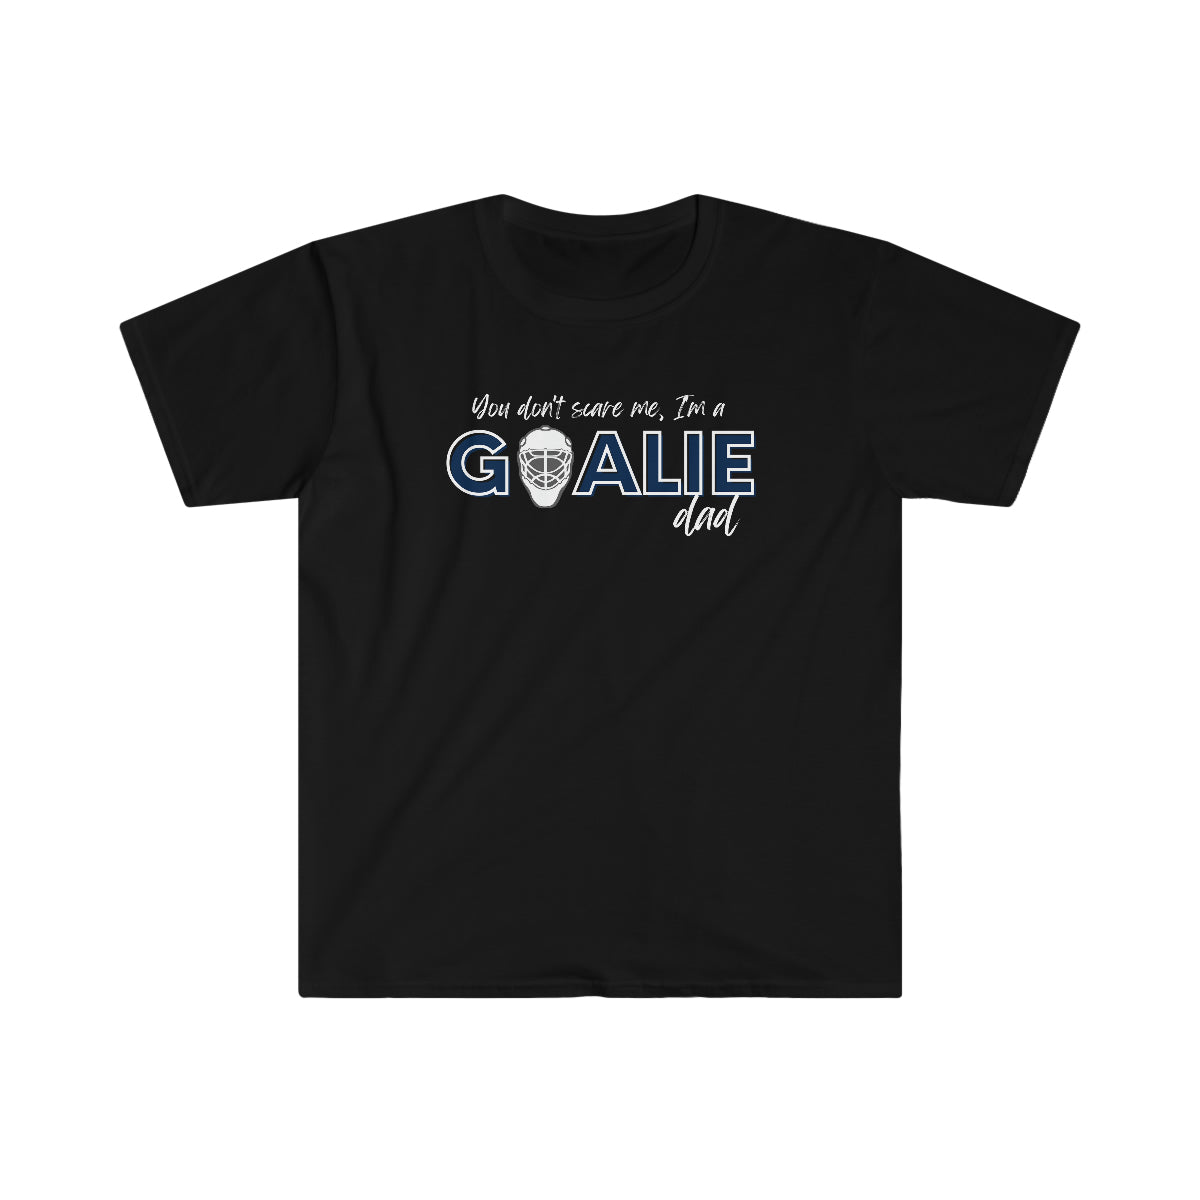 You don't scare me, I'm a Goalie Dad - Men's Tee